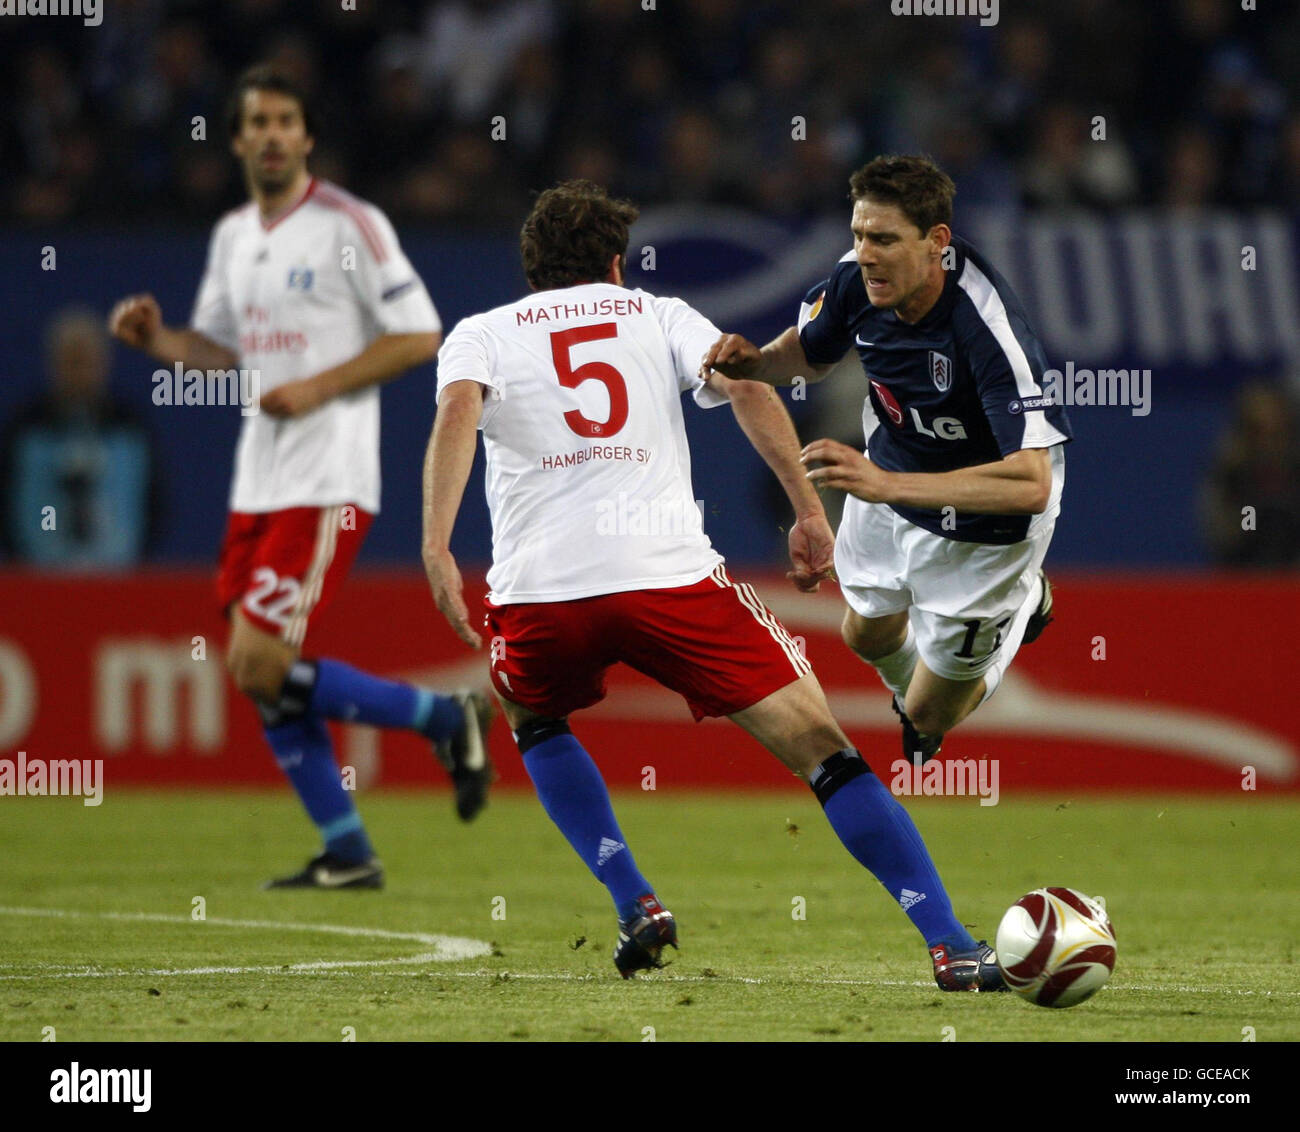 Fulham's Zoltan Gera (right) in action with Hamburg's Joris Mathijsen during the Europa League Semi Final match at the HSH Nordbank Arena, Hamburg, Germany. Stock Photo